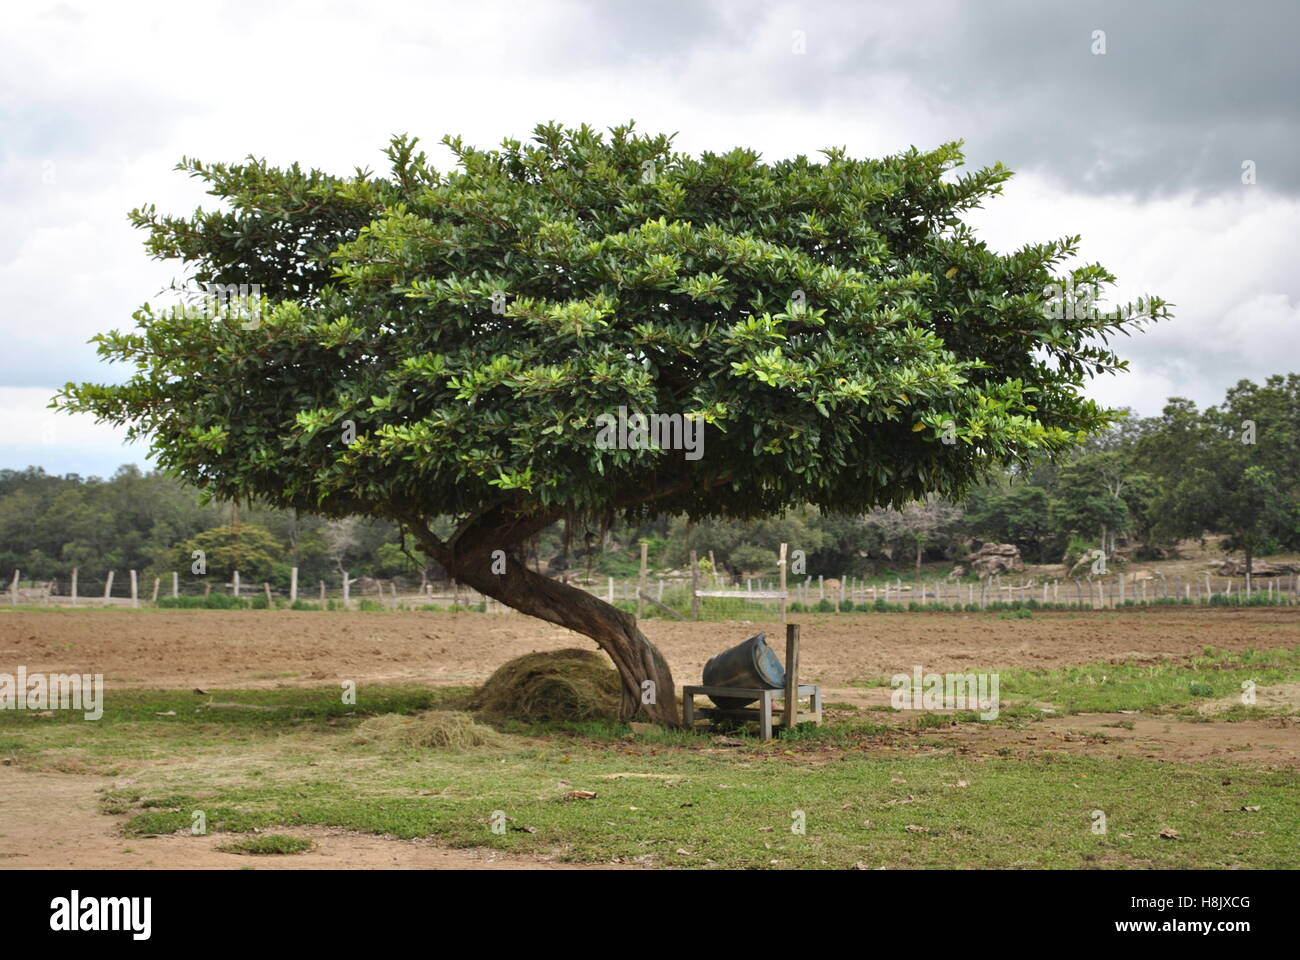 Photograph taken of Green Tree in Central America three hours north of Jaco Costa Rica Stock Photo